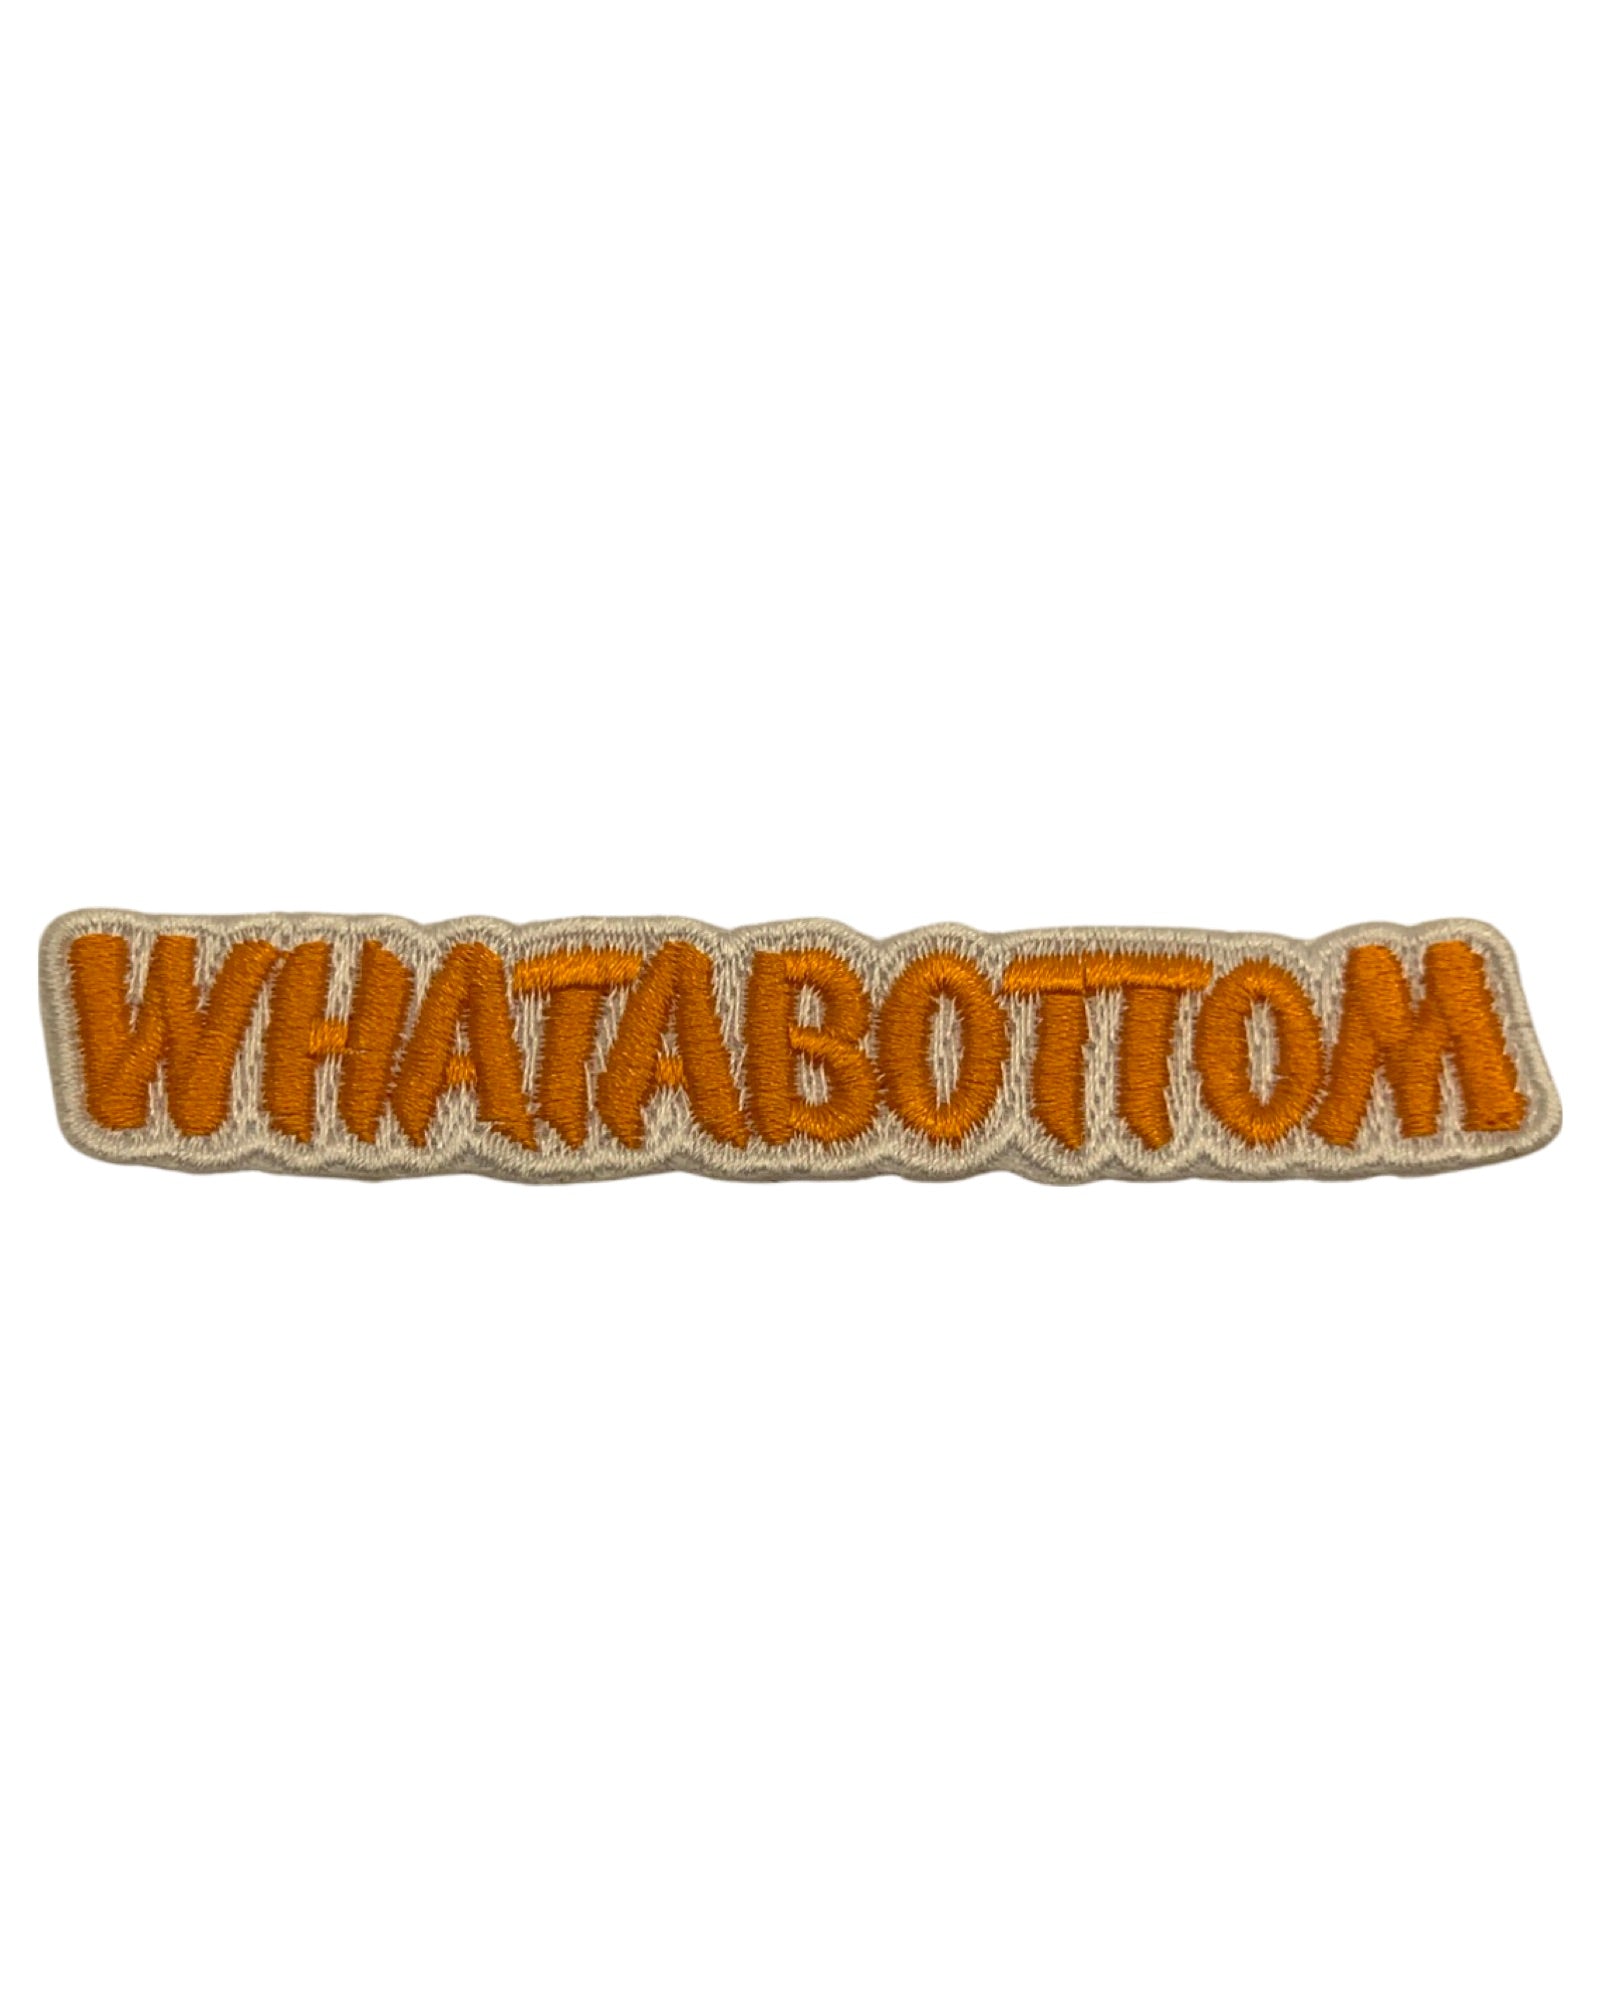 What-A-Bottom Patch